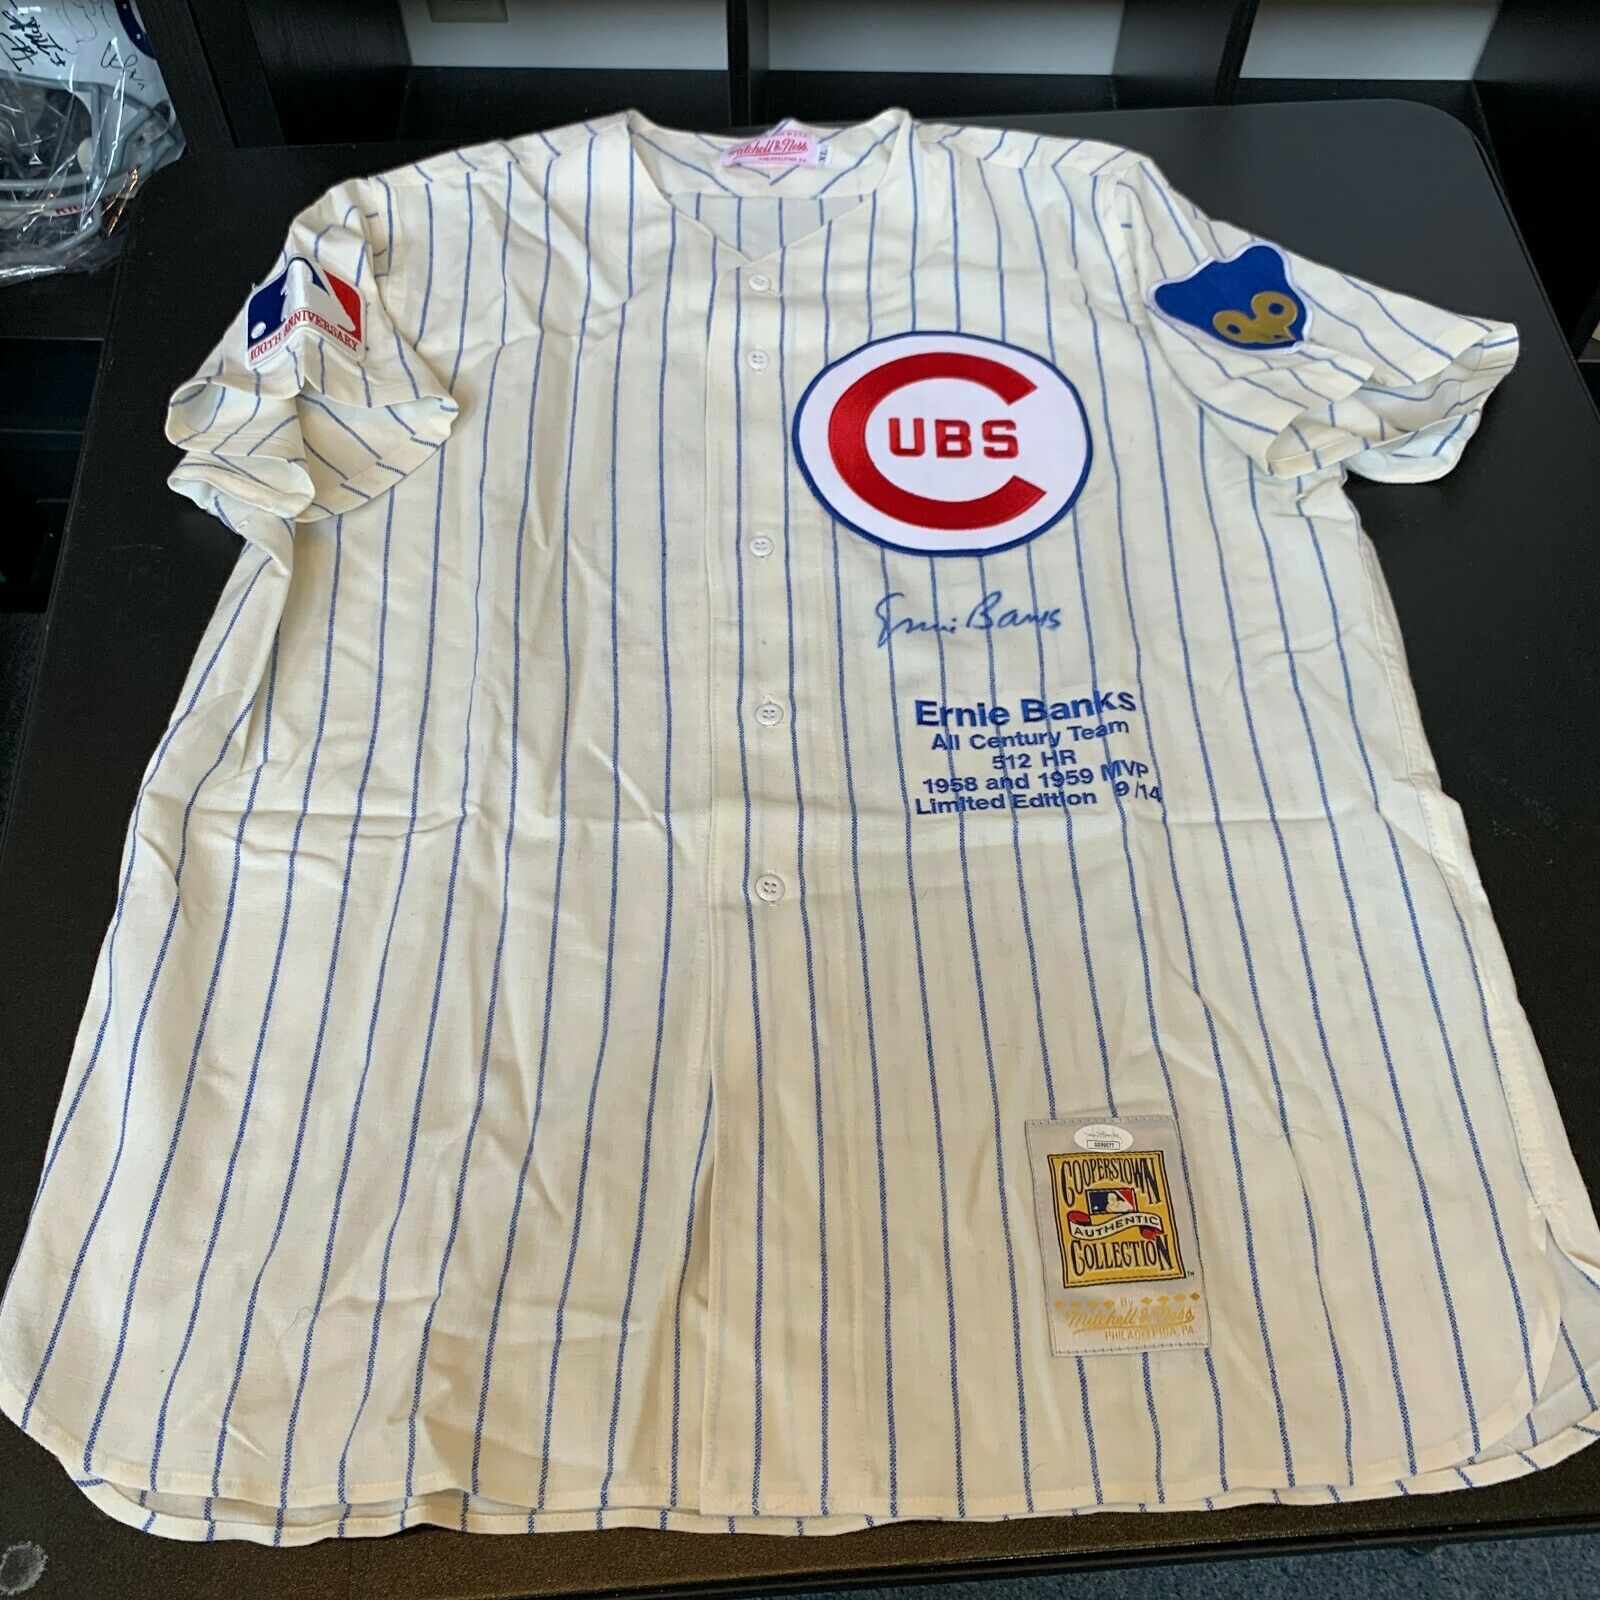 Ernie Banks 1968 Chicago Cubs Cooperstown Away Throwback MLB Jersey